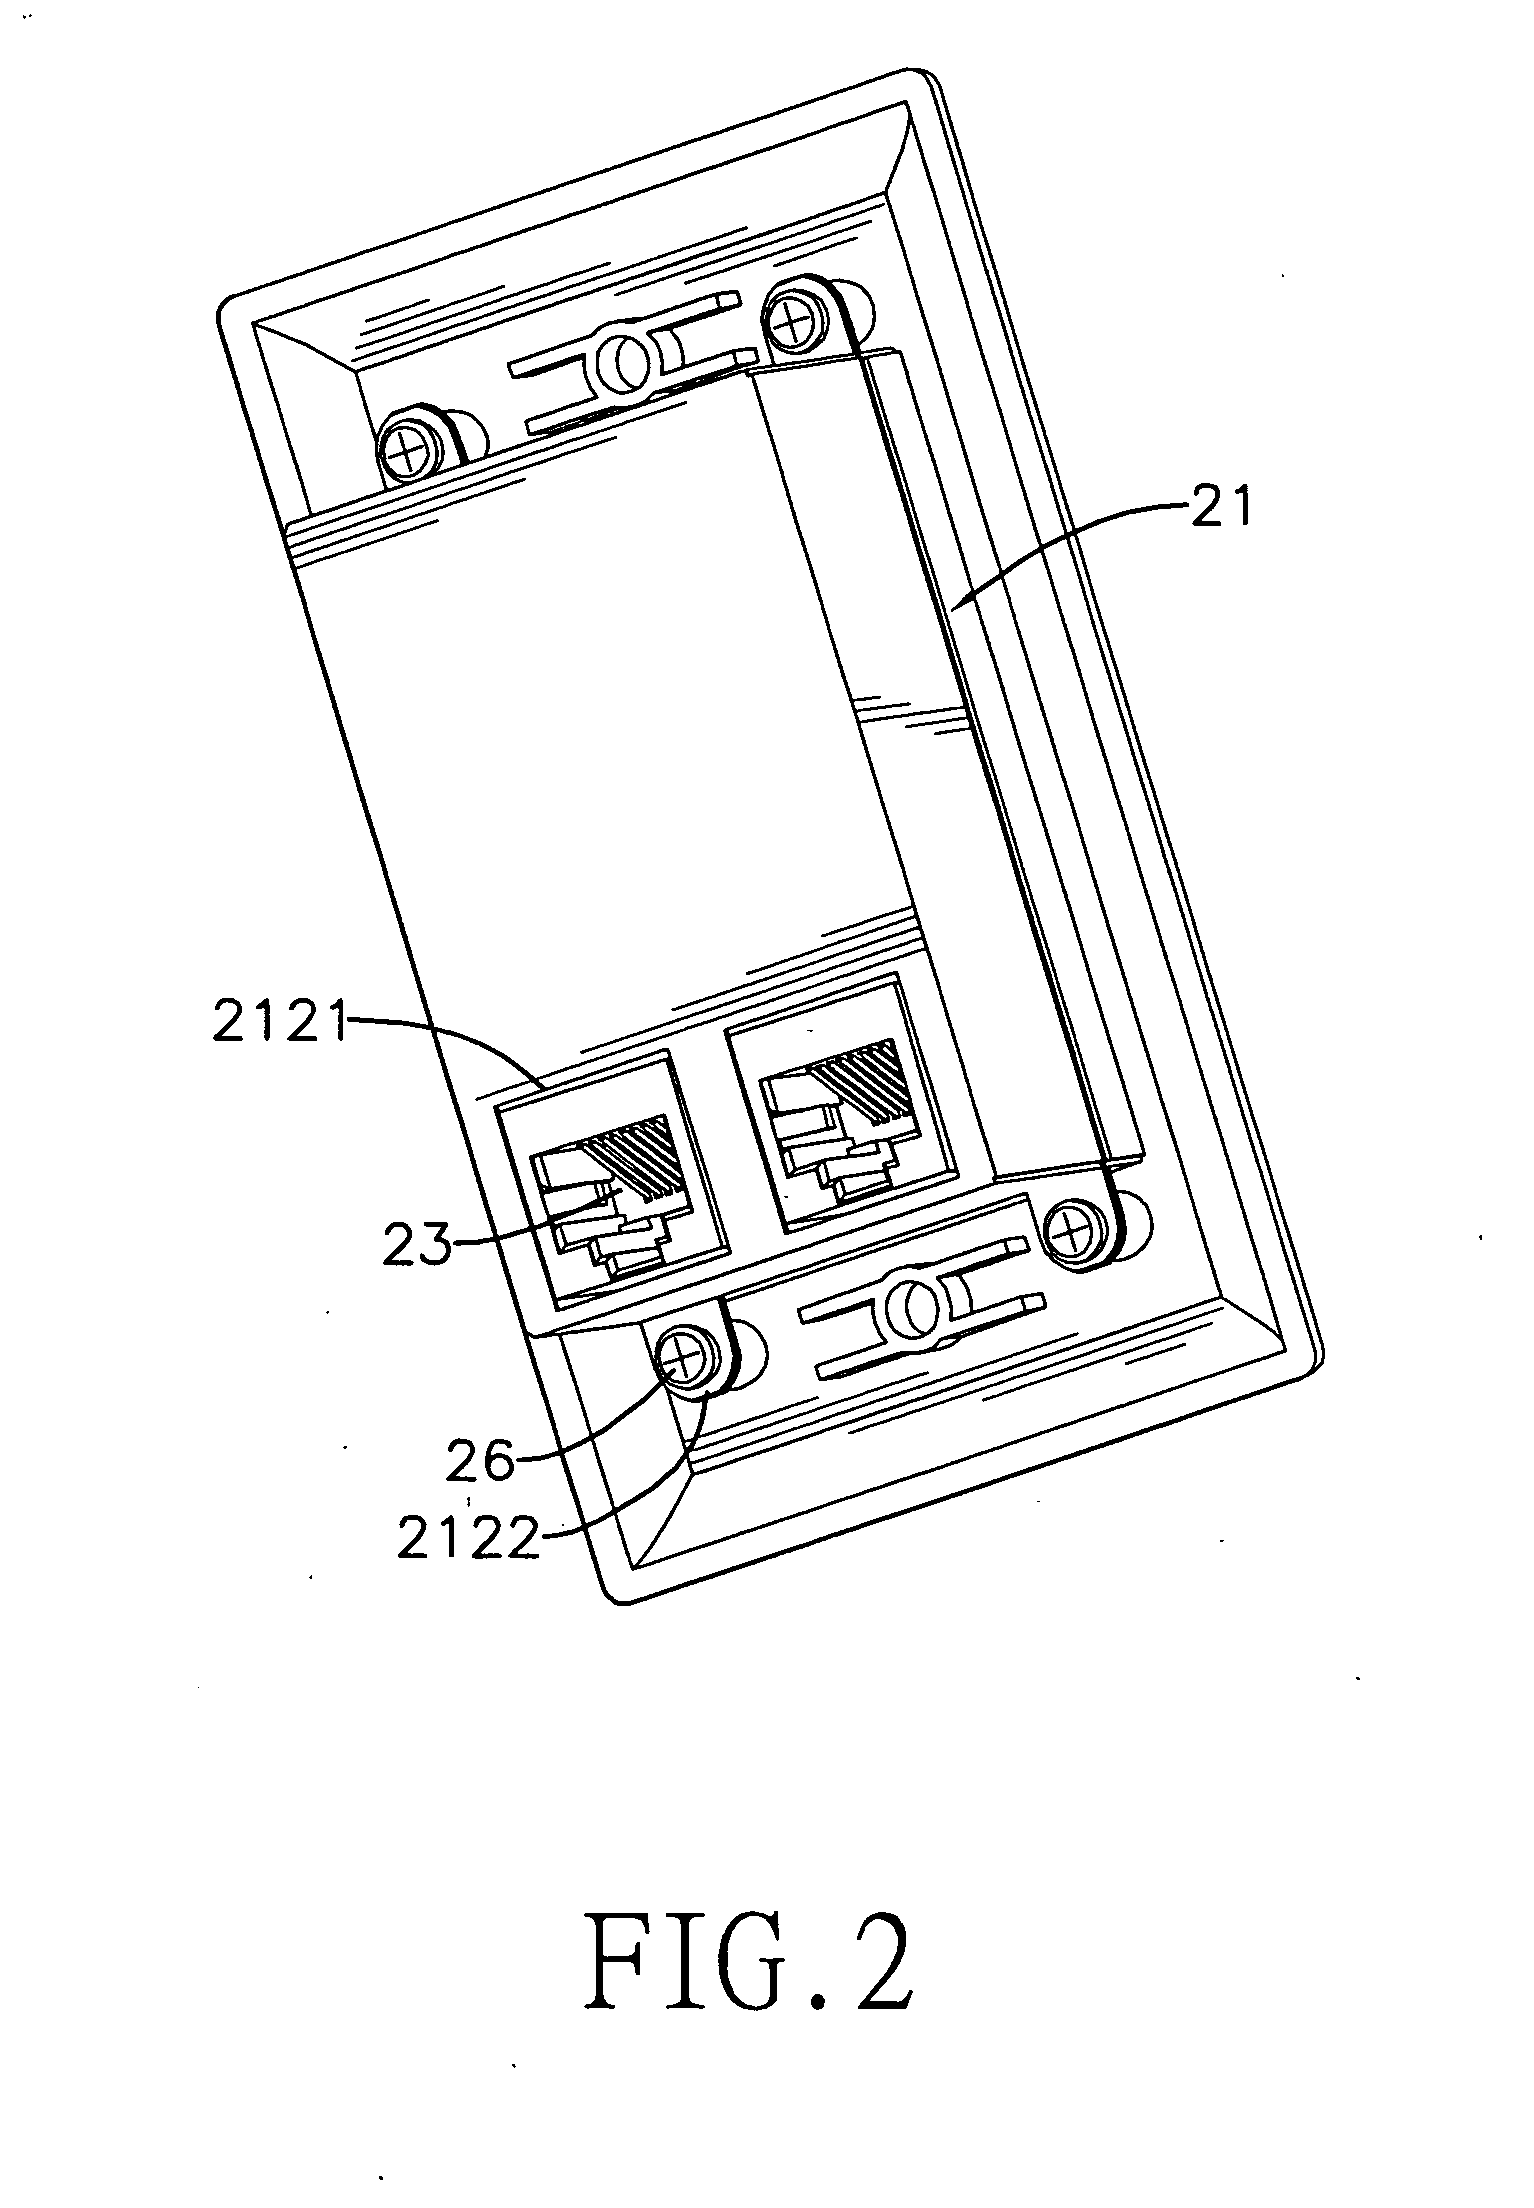 Wall-mounted high definition multimedia interface conversion device